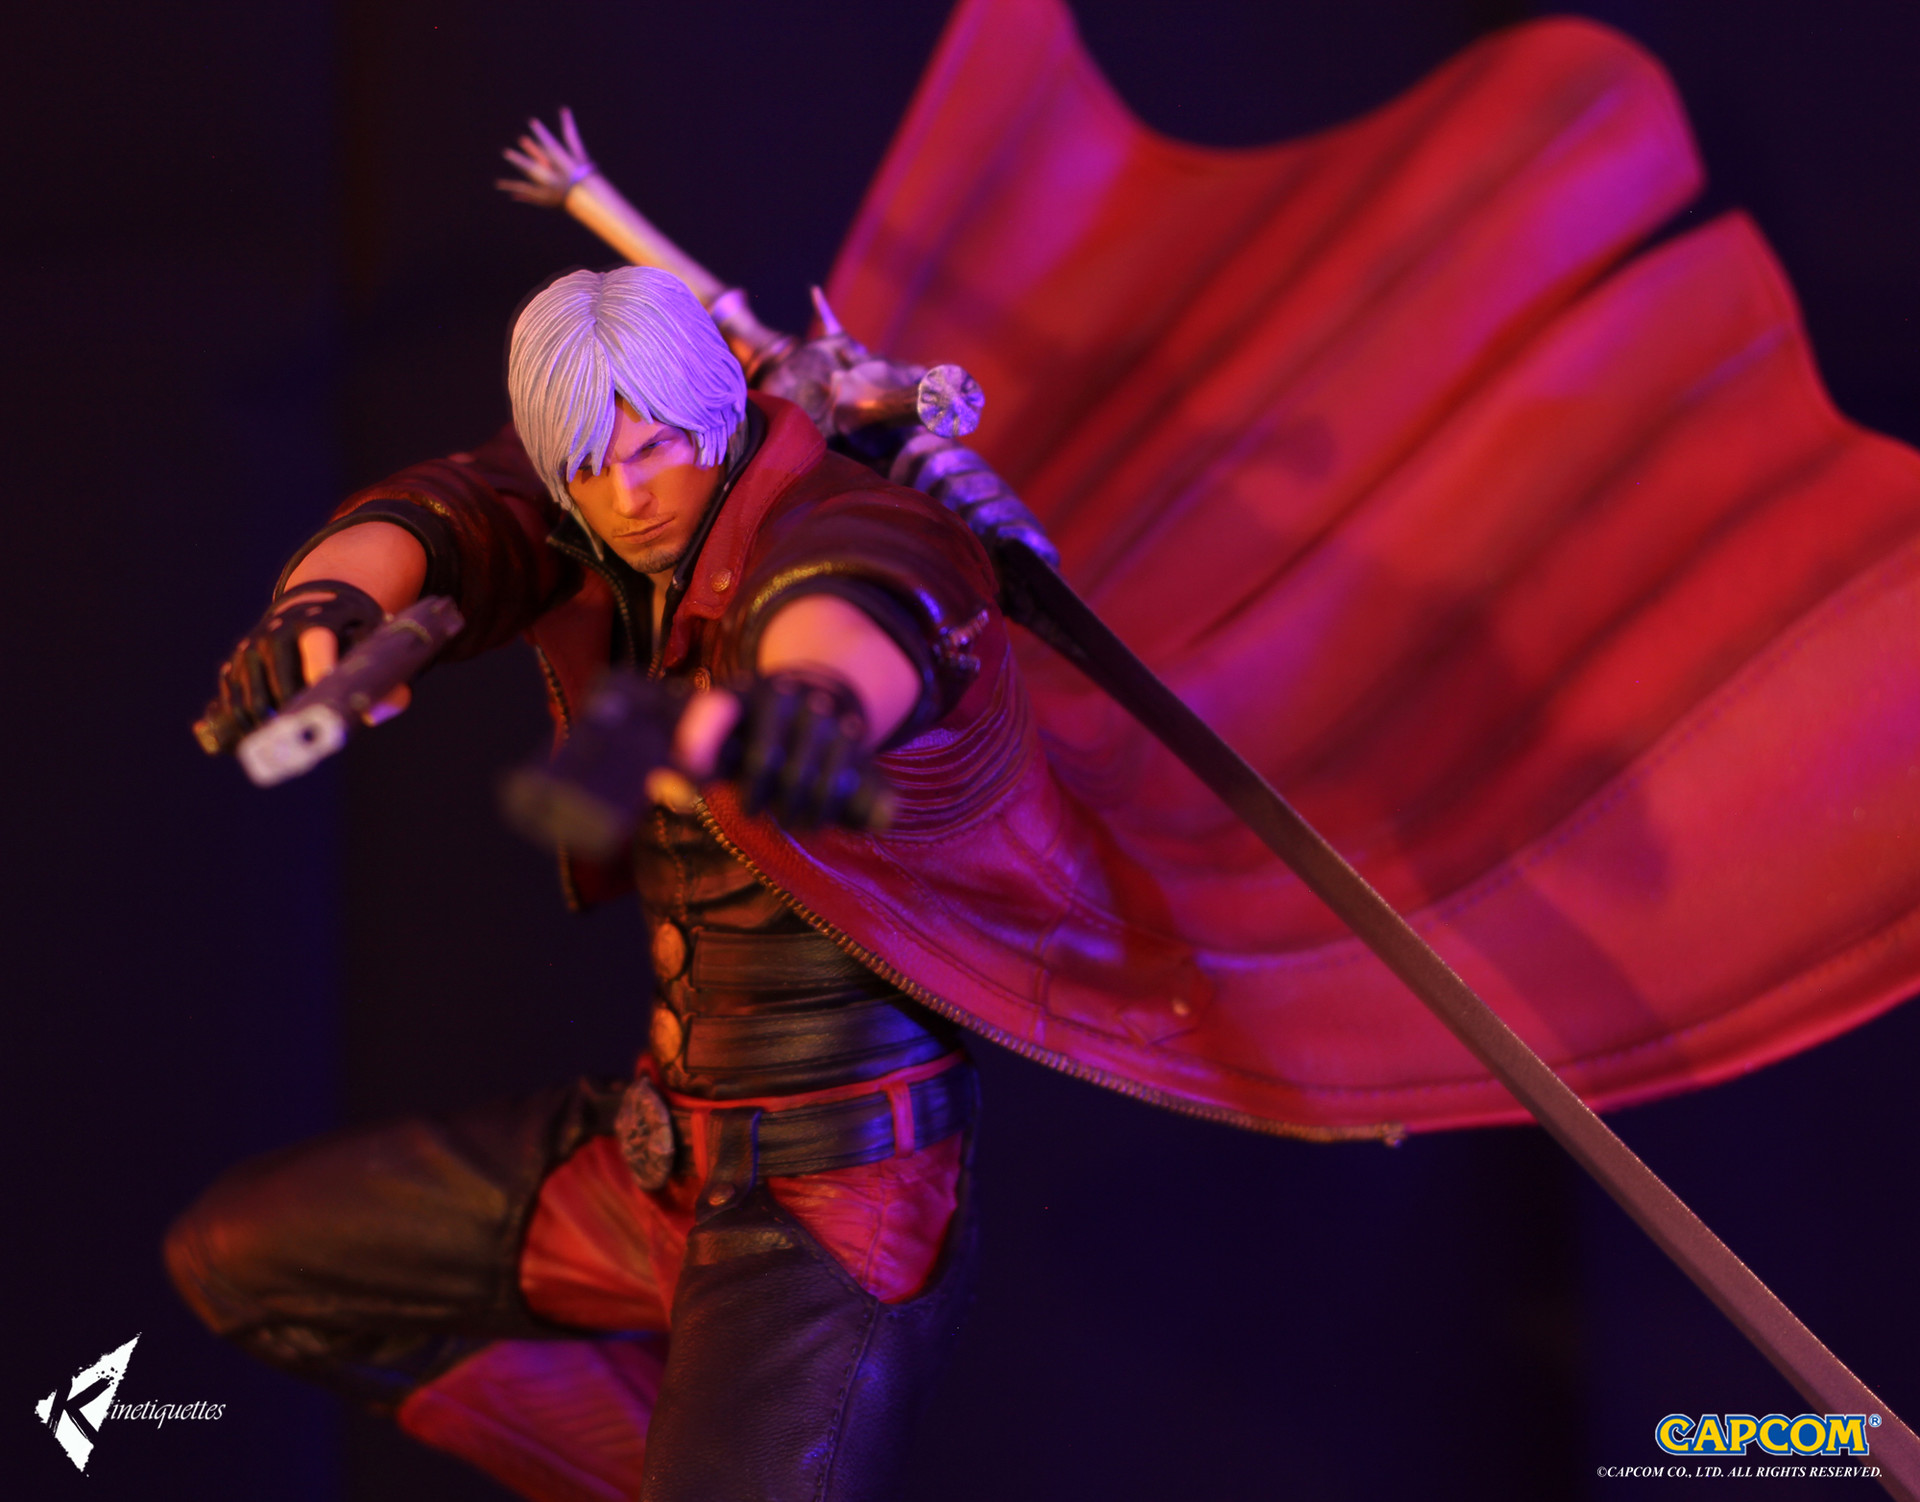 Dante - Devil May Cry - Son of Sparda | Poster